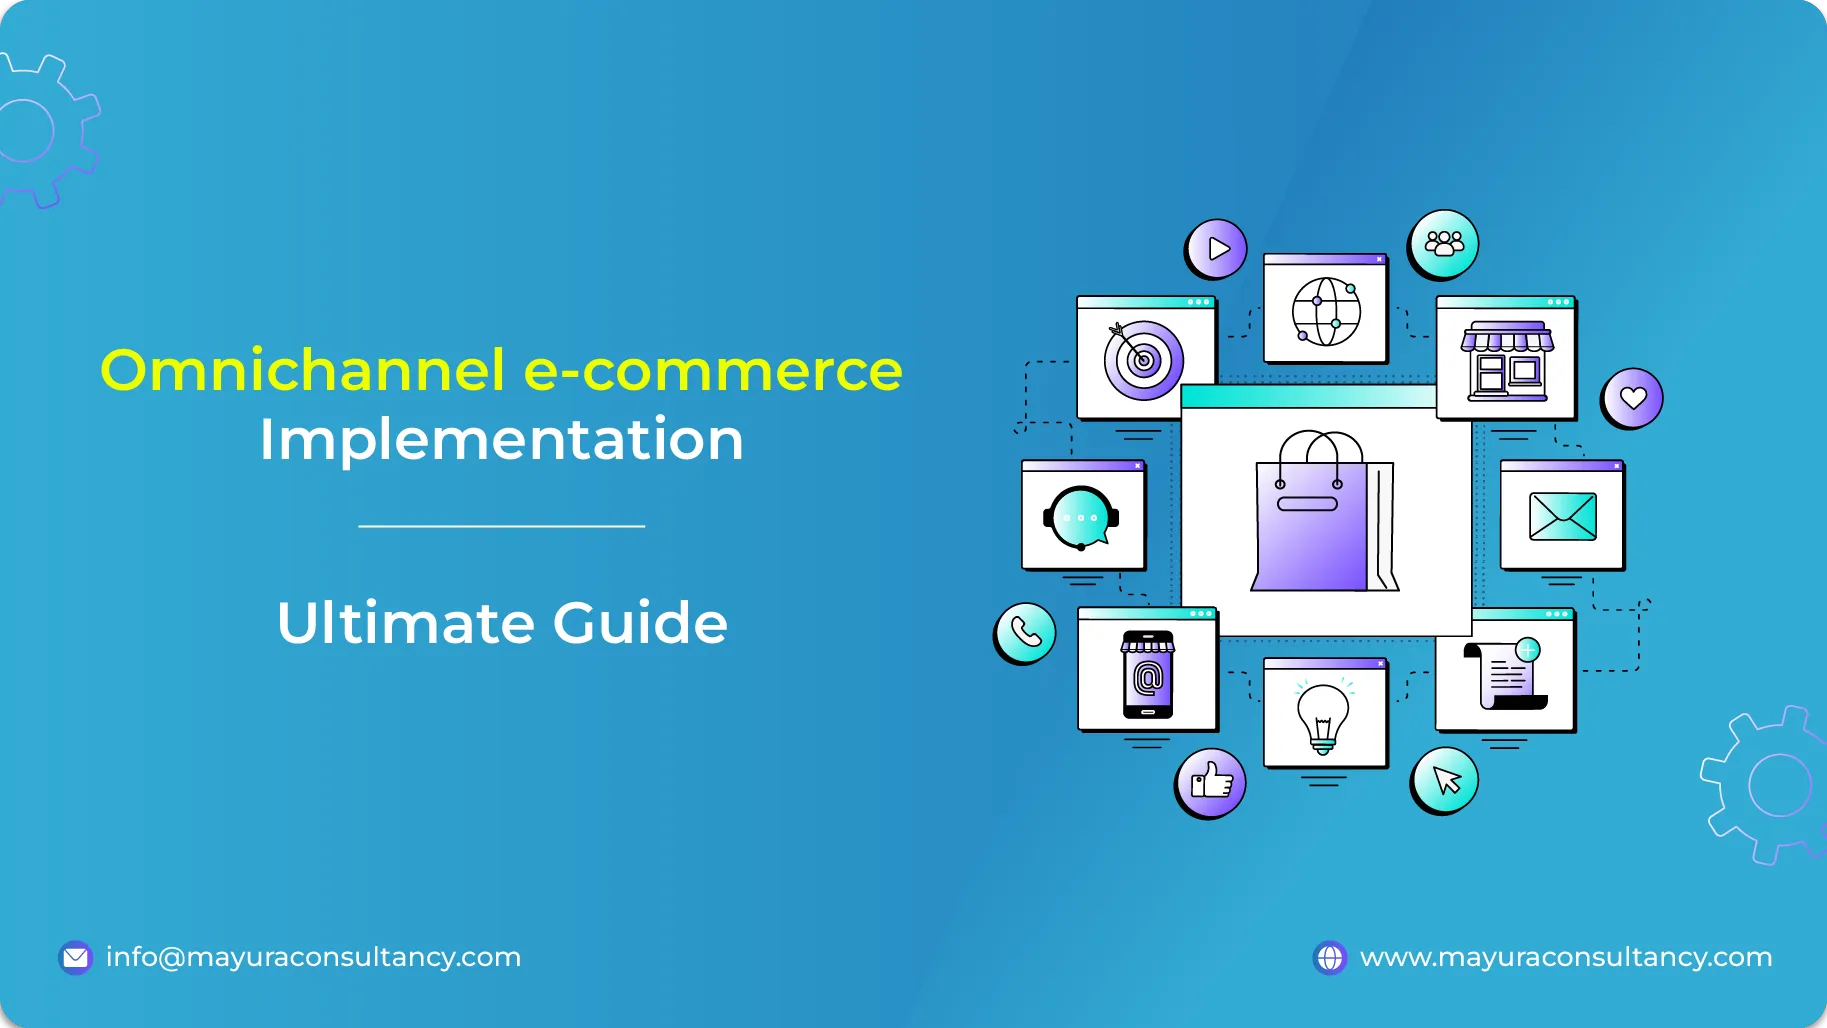 Ultimate Guide to Omnichannel Ecommerce Implementation